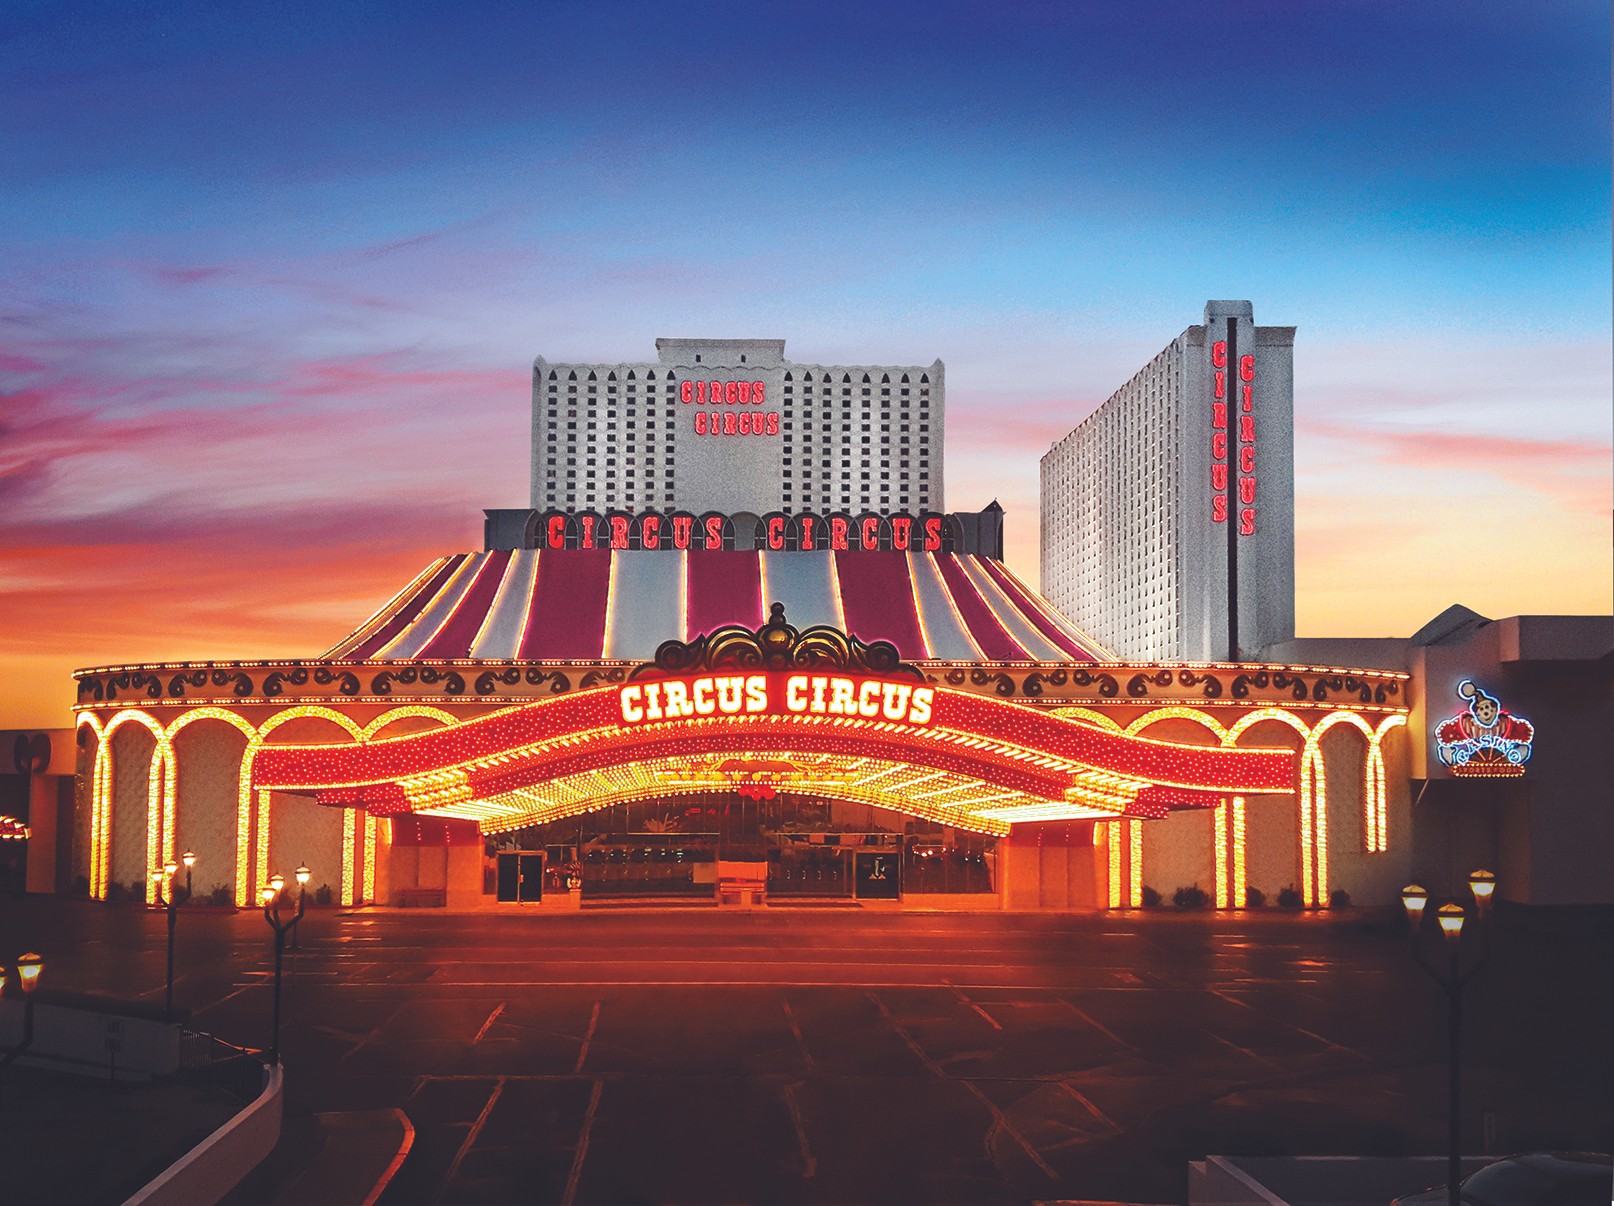 IGT Advantage Casino Management System to Modernize the Gaming Experience at Circus Circus